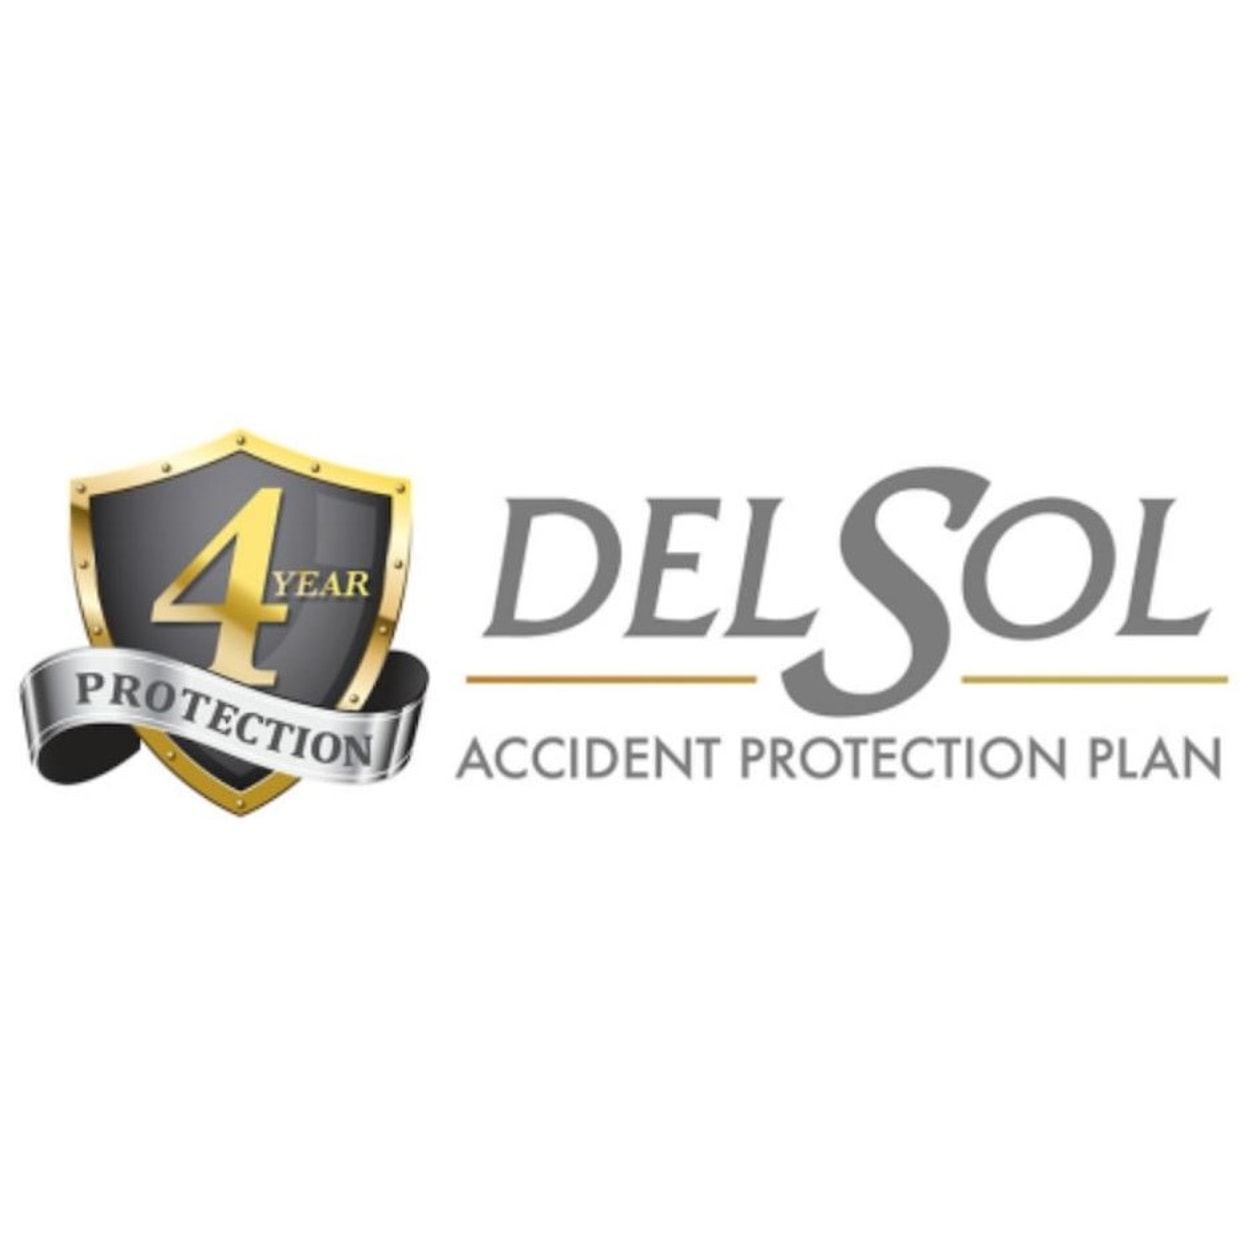 DS Del Sol Protection Plan 4YR Protection Plan - $2001 to $2,500